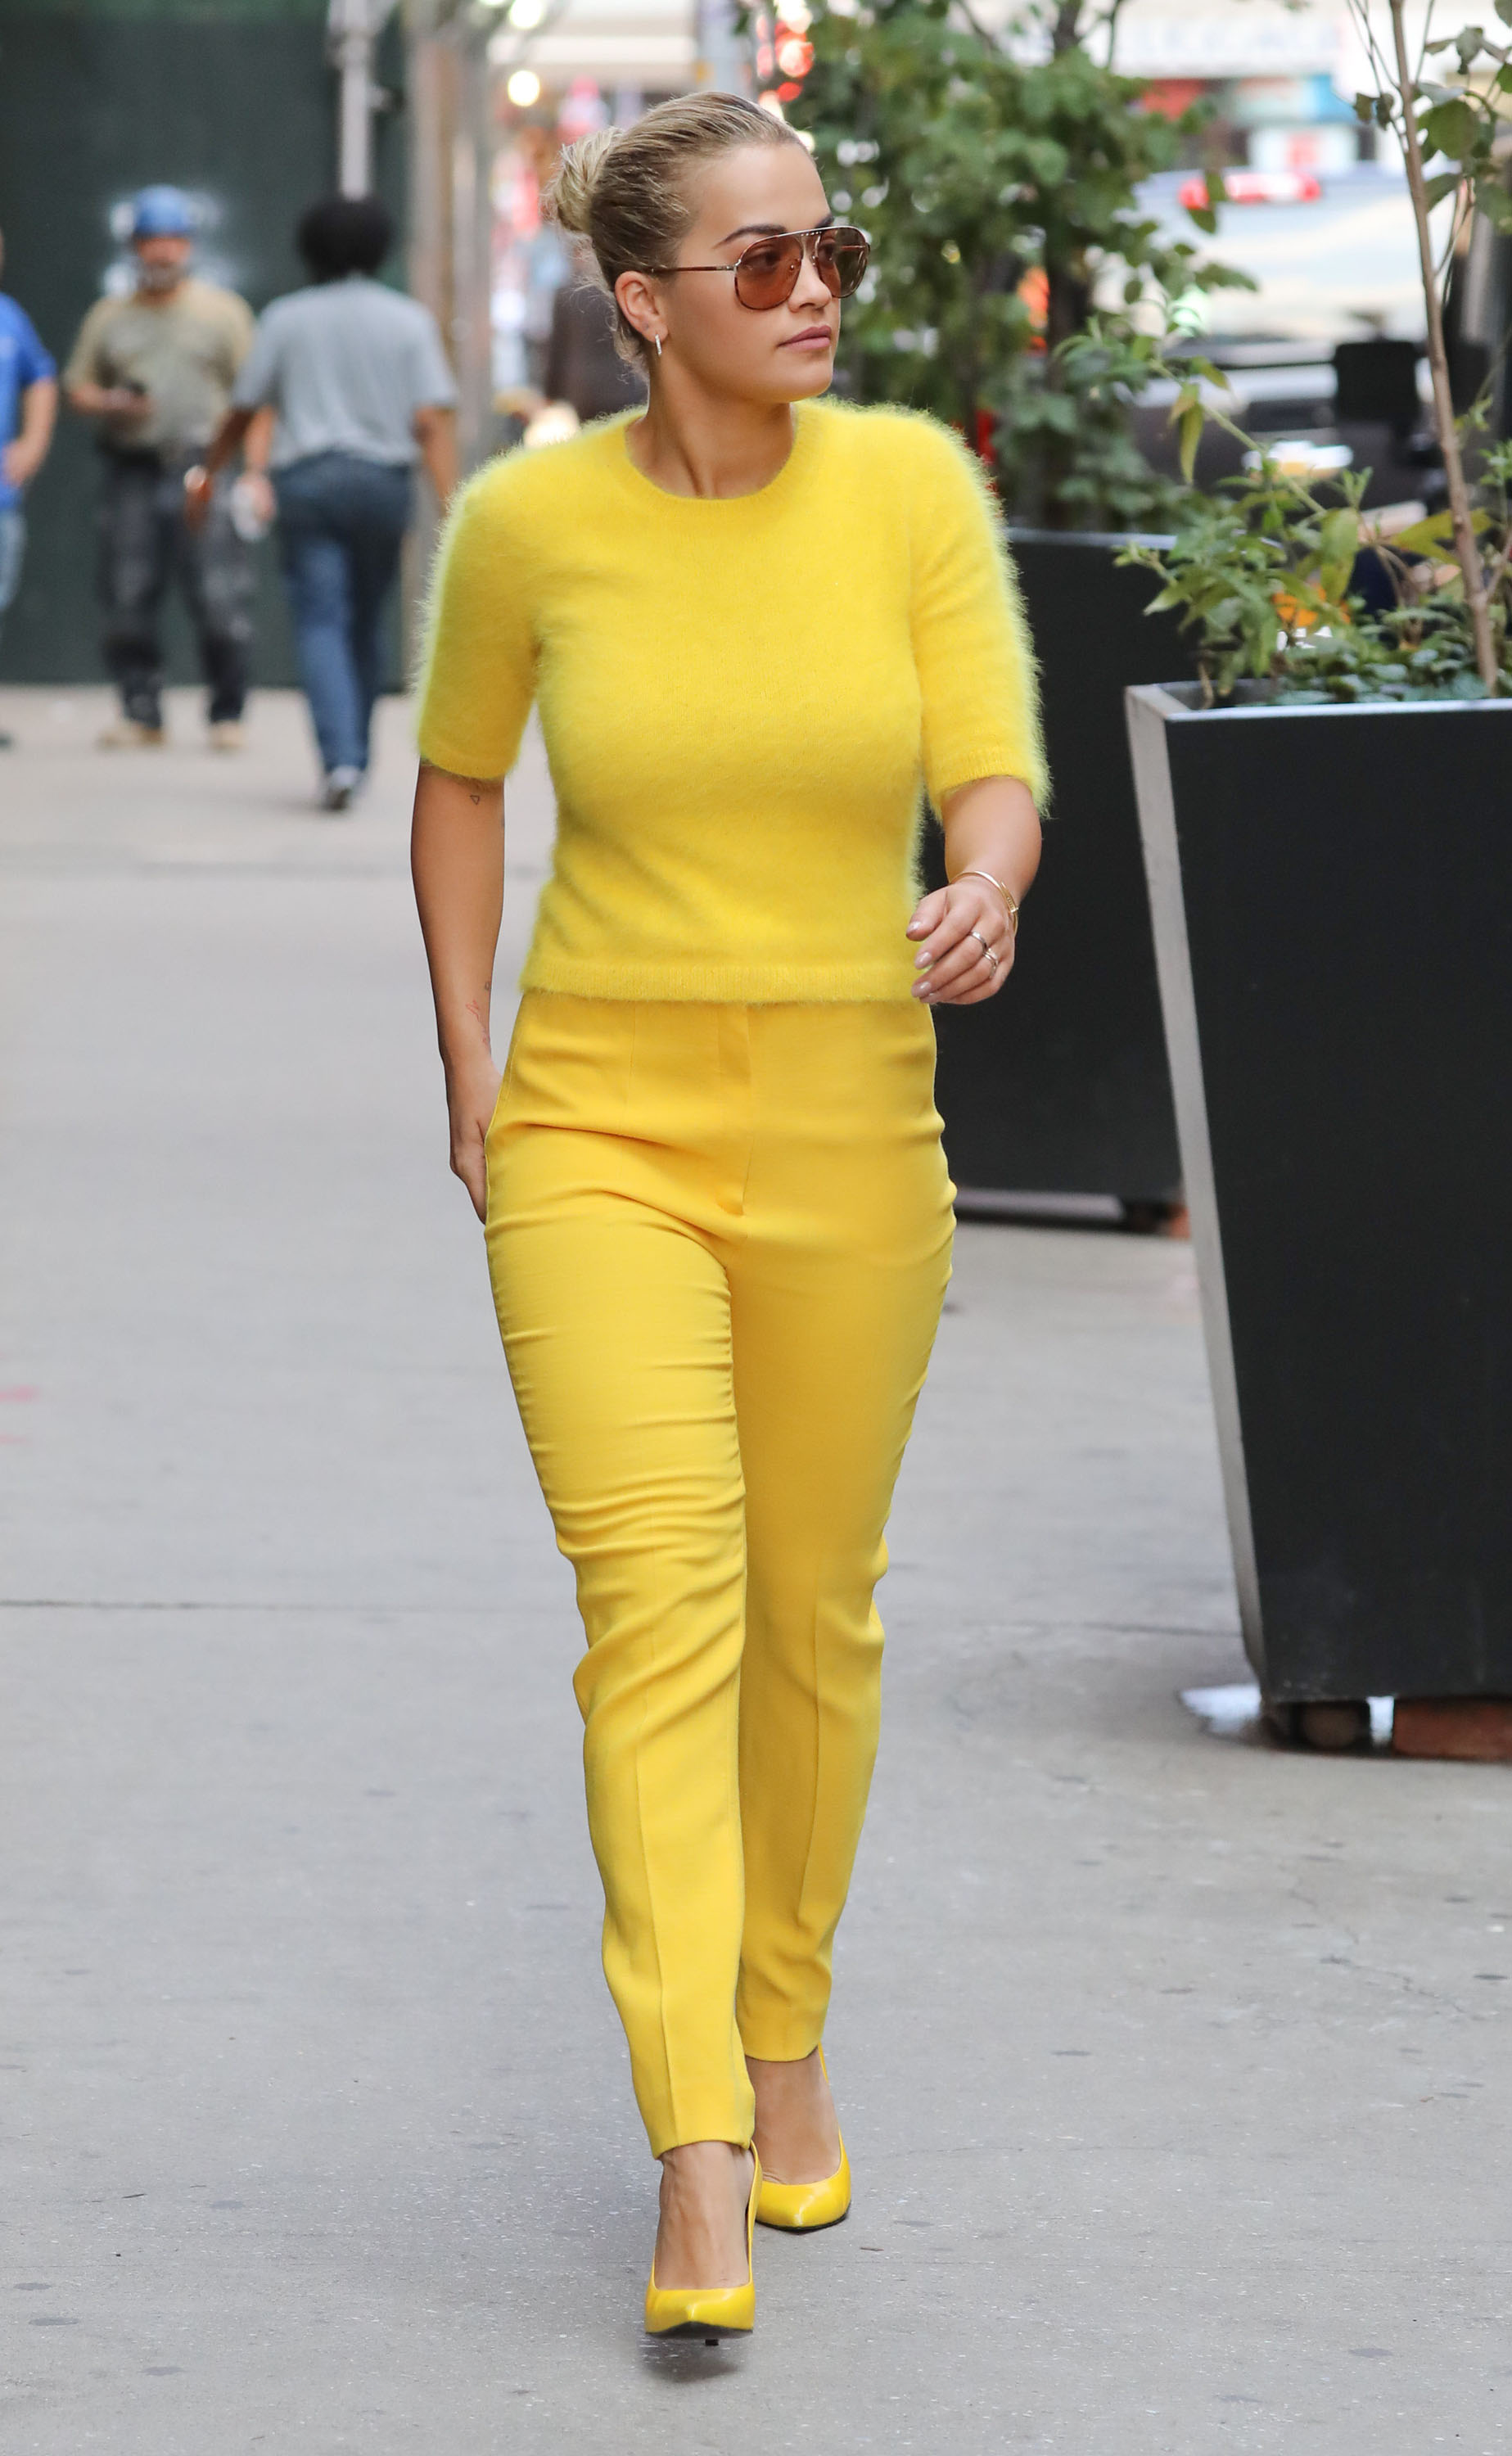 Rita Ora steps out dressed head to toe in yellow in New York City.jpg